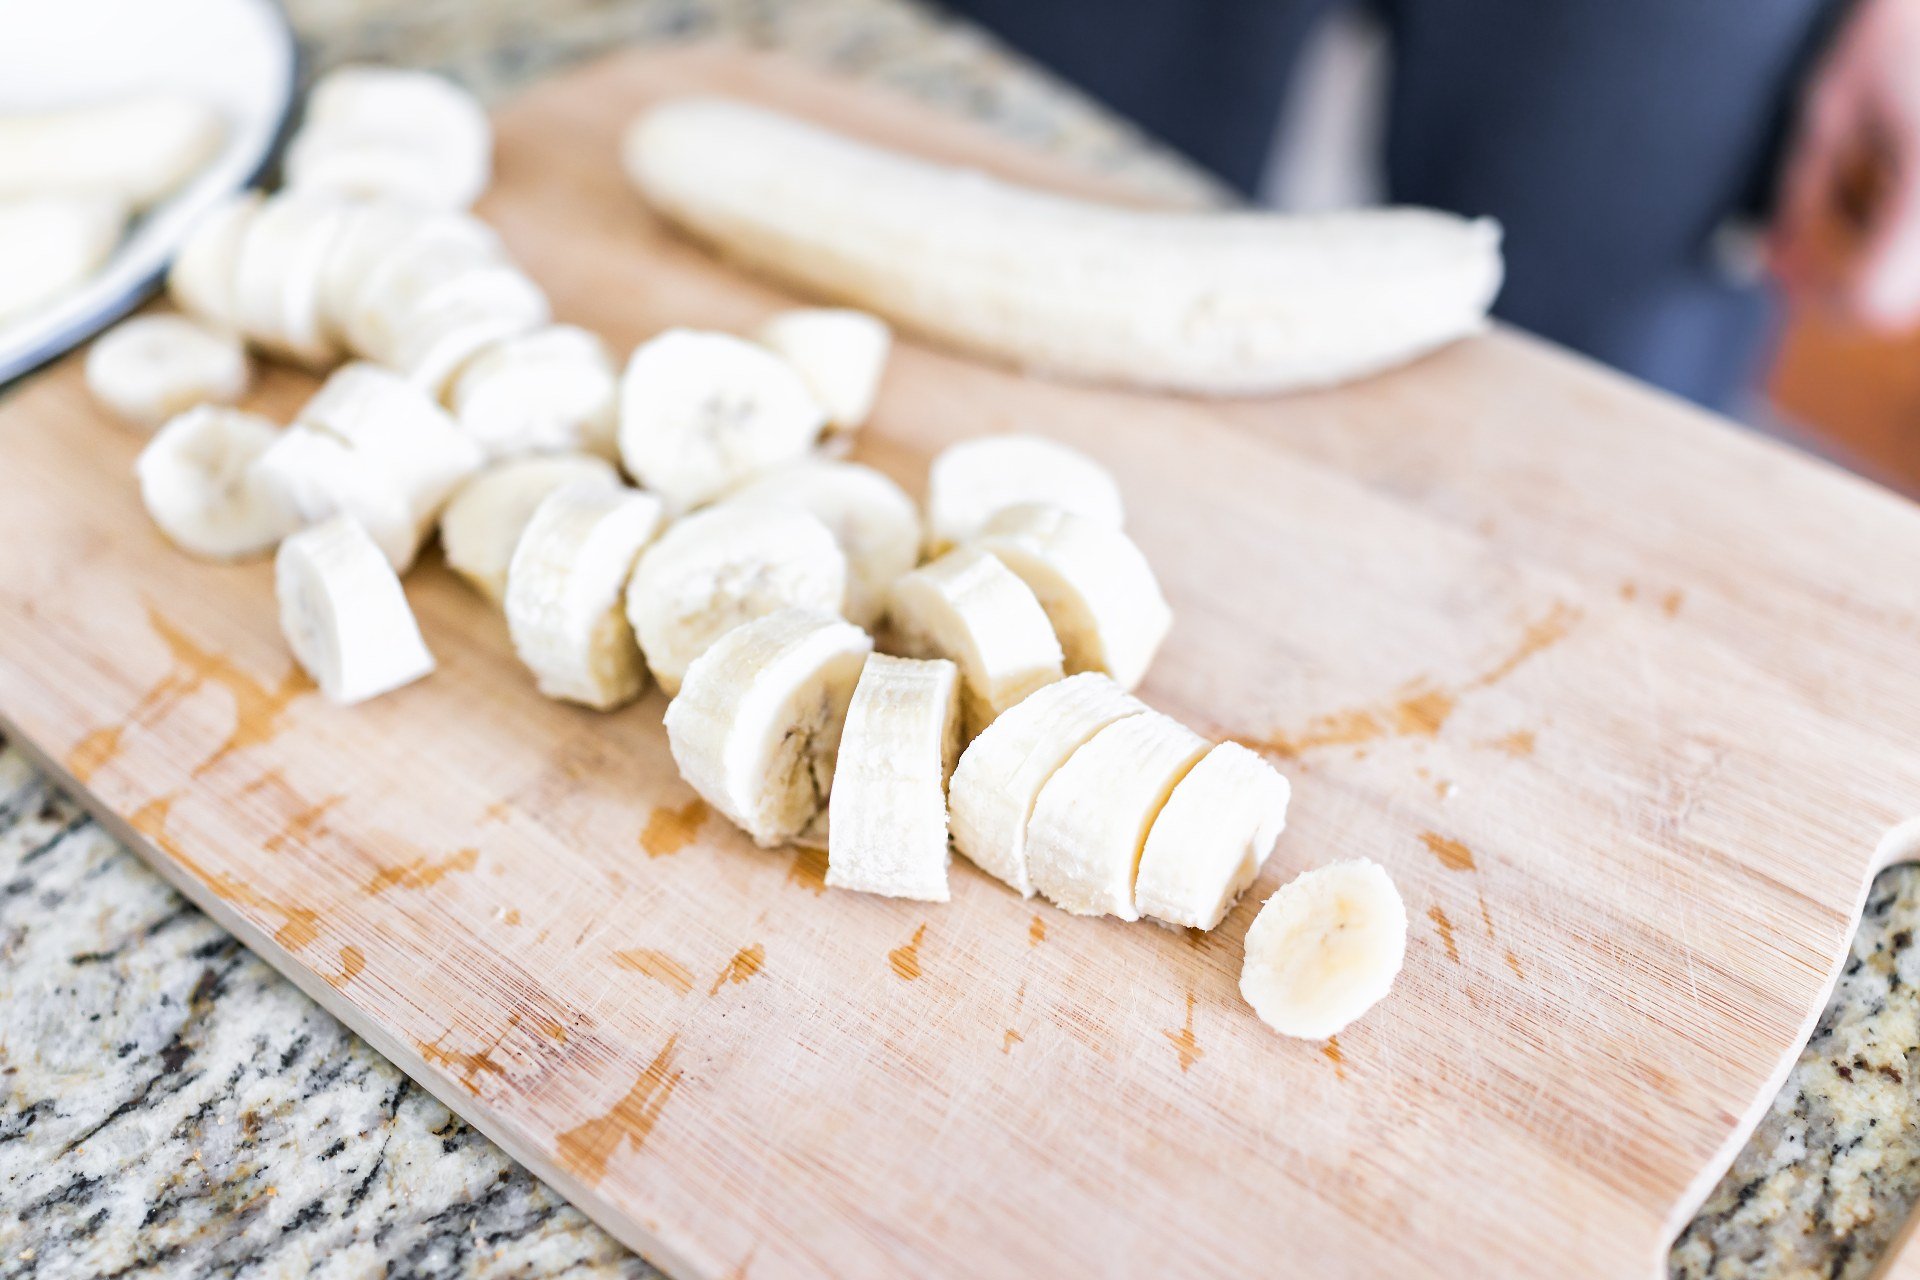 how-to-cut-banana-for-6-month-old